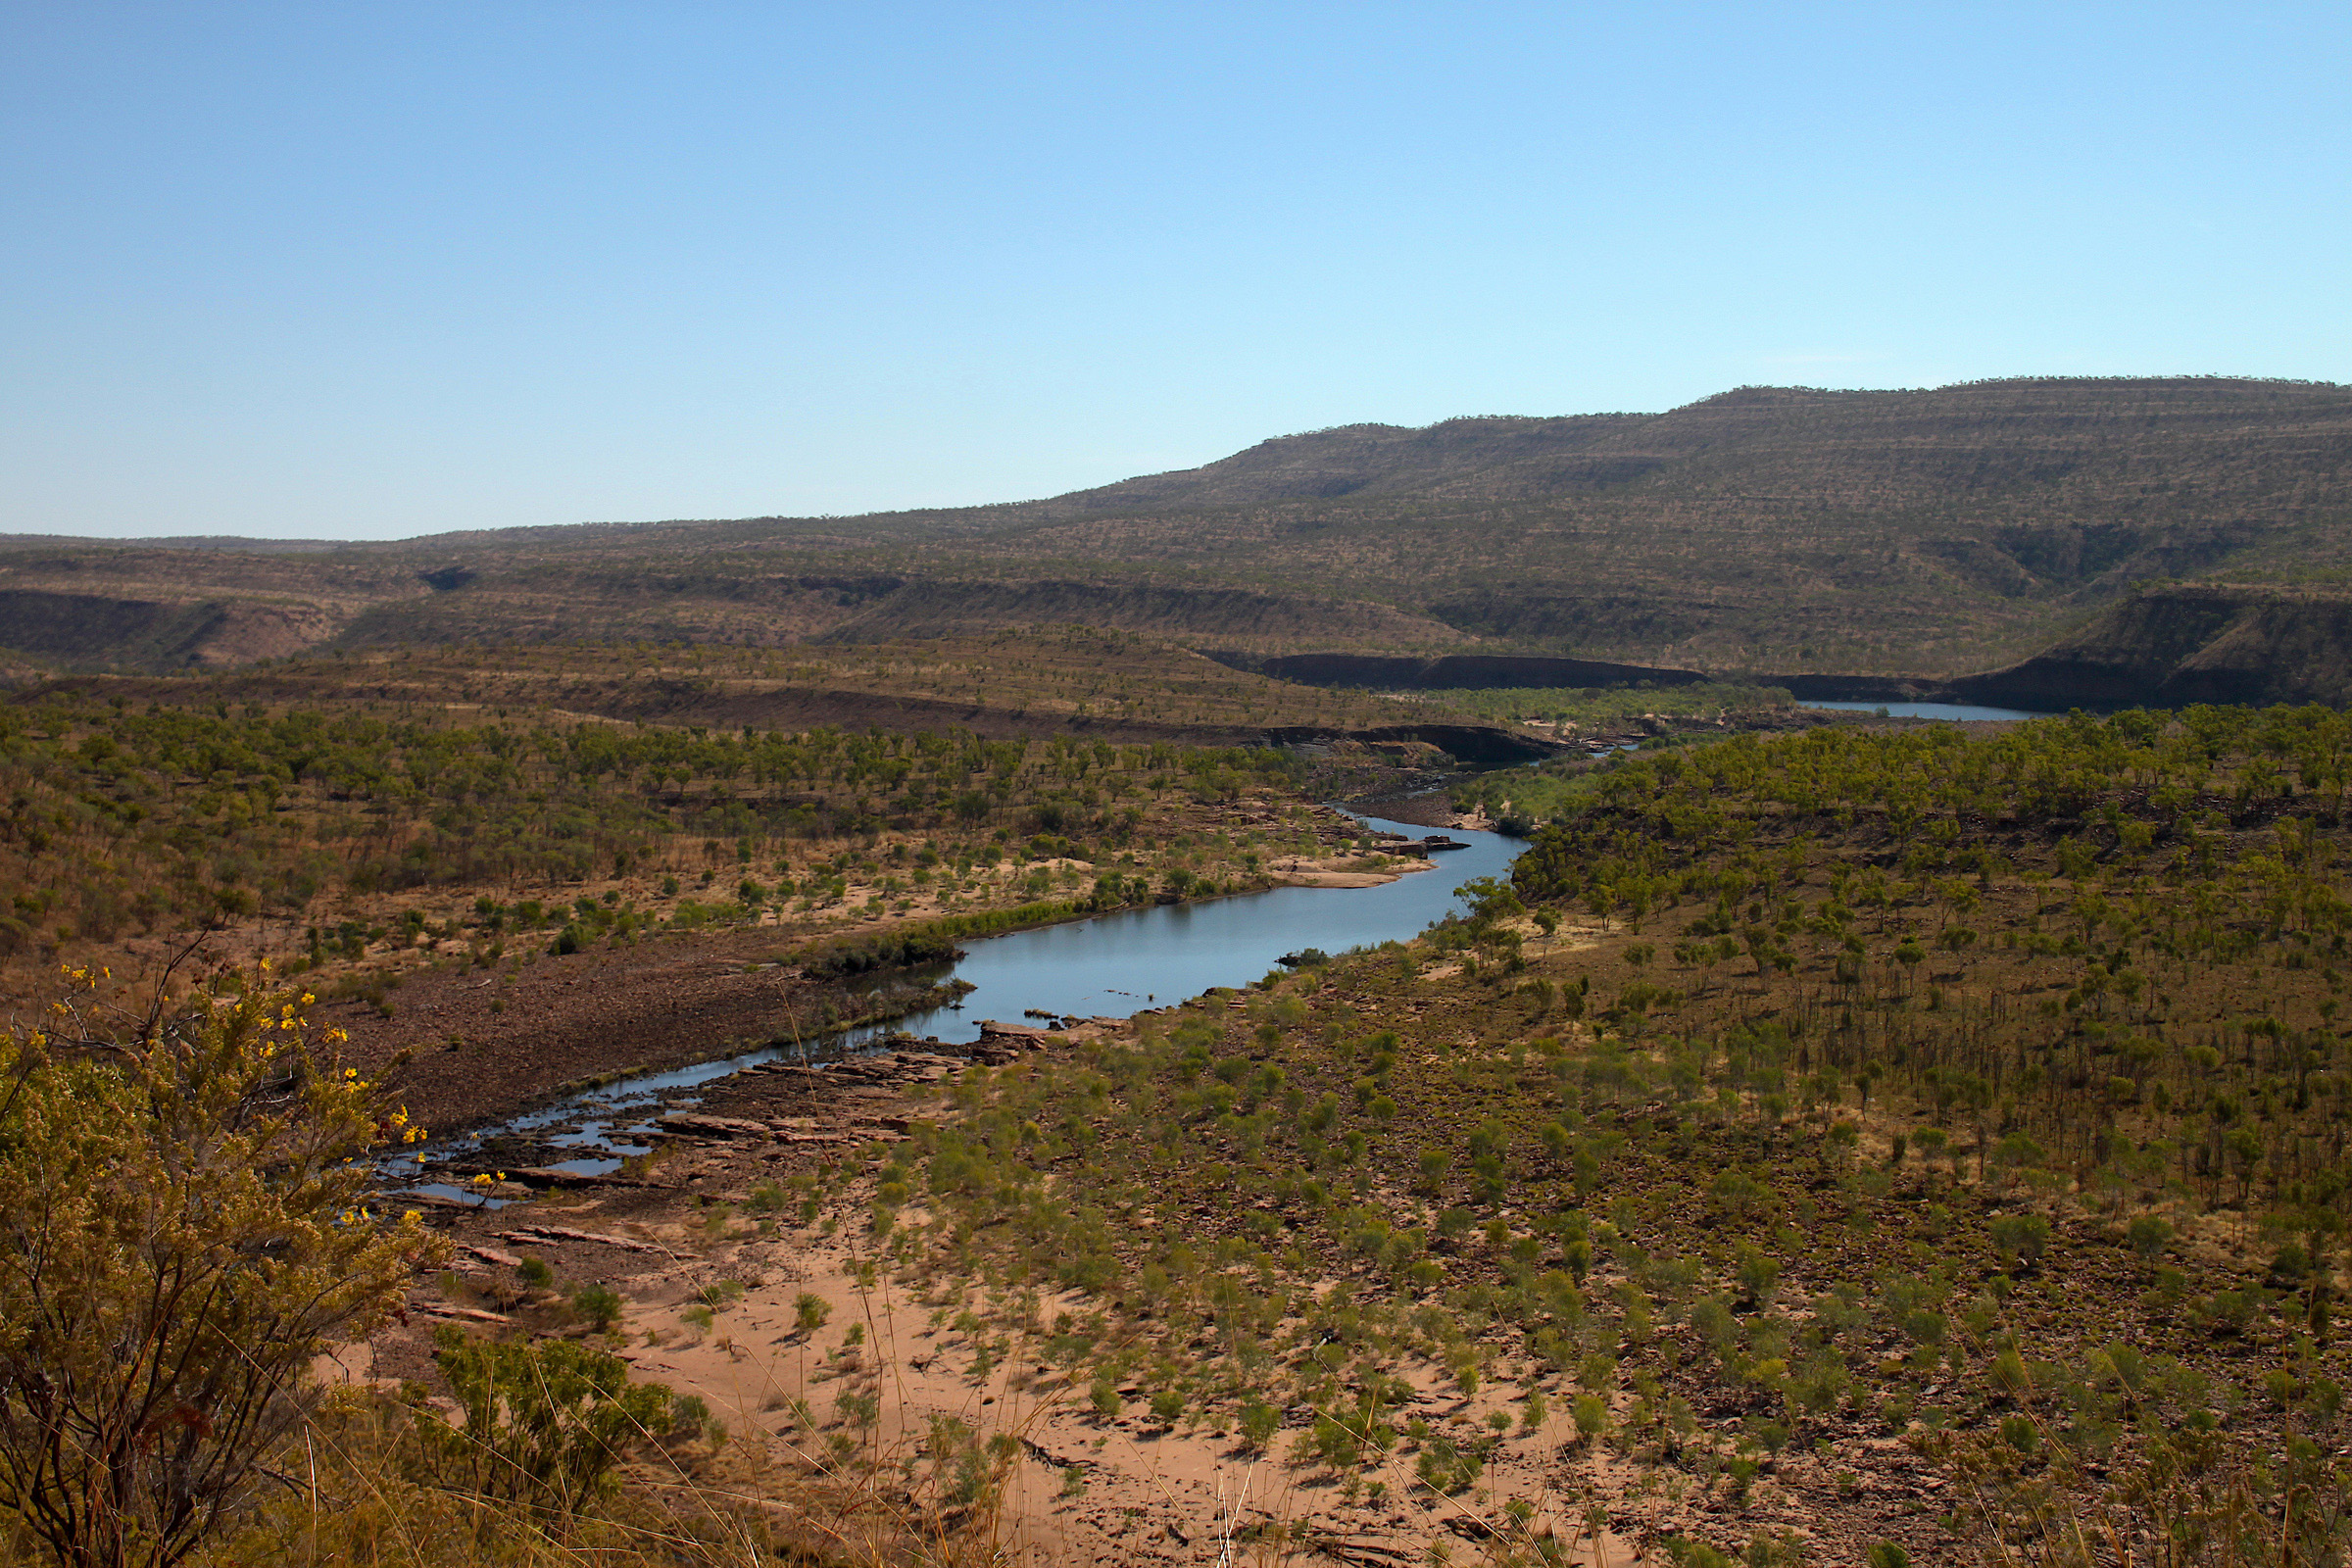 The landscape featuring bush scrub, water and mountains in the distance